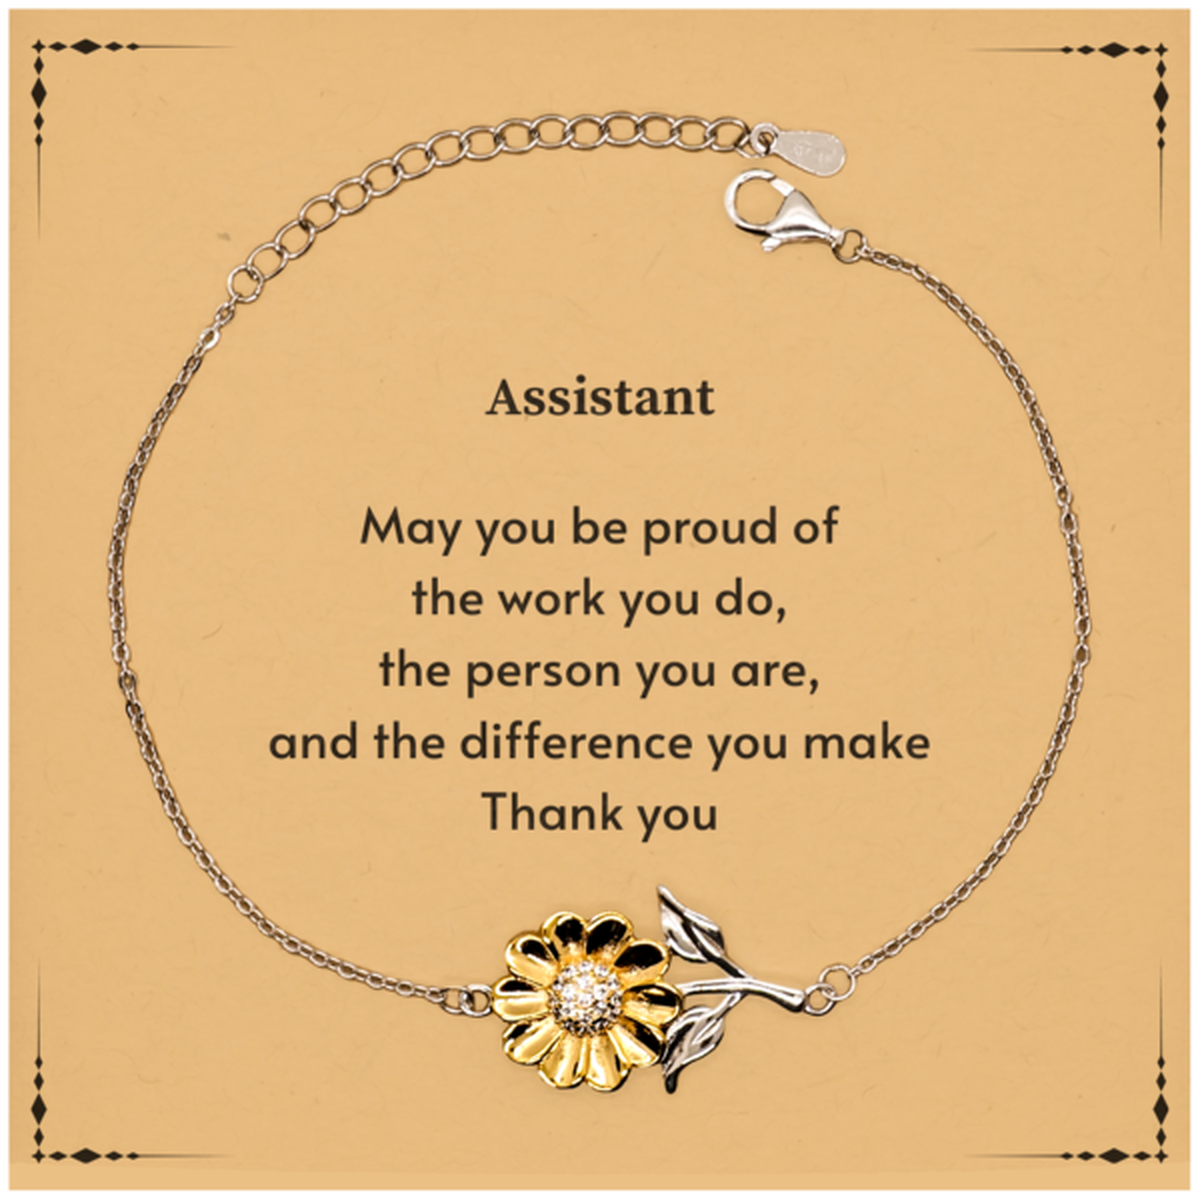 Heartwarming Sunflower Bracelet Retirement Coworkers Gifts for Assistant, Assistant May You be proud of the work you do, the person you are Gifts for Boss Men Women Friends